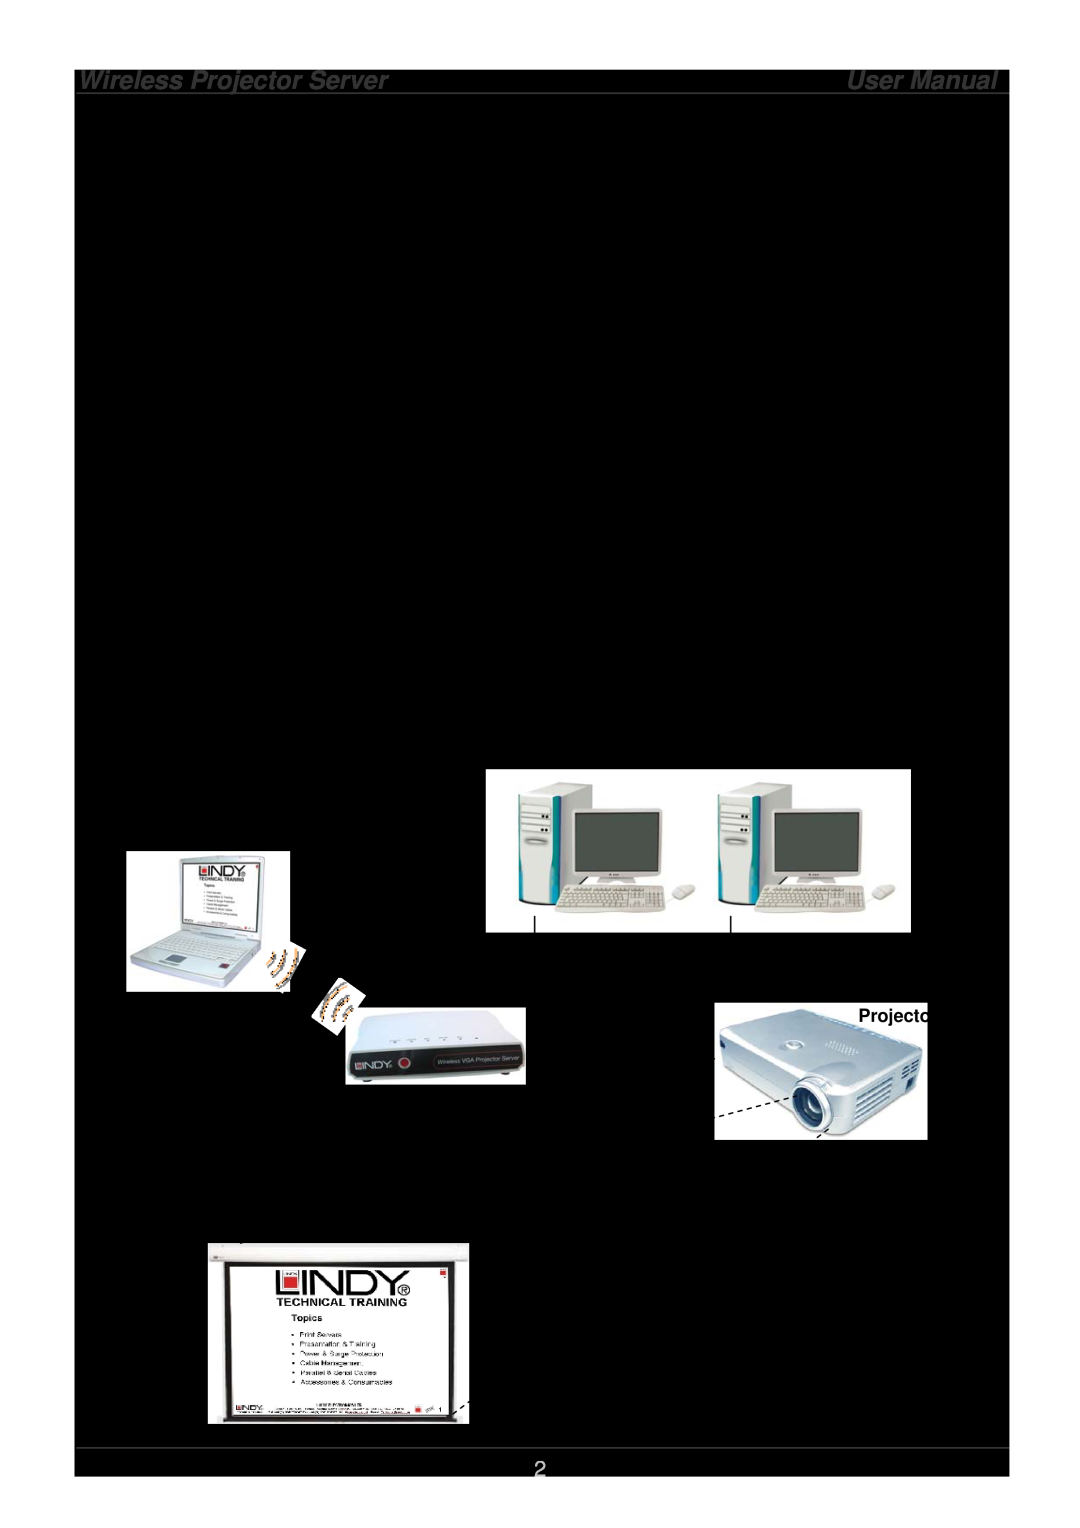 Lindy 32500 user manual Introduction, Features, Wireless Projector Server, User Manual 